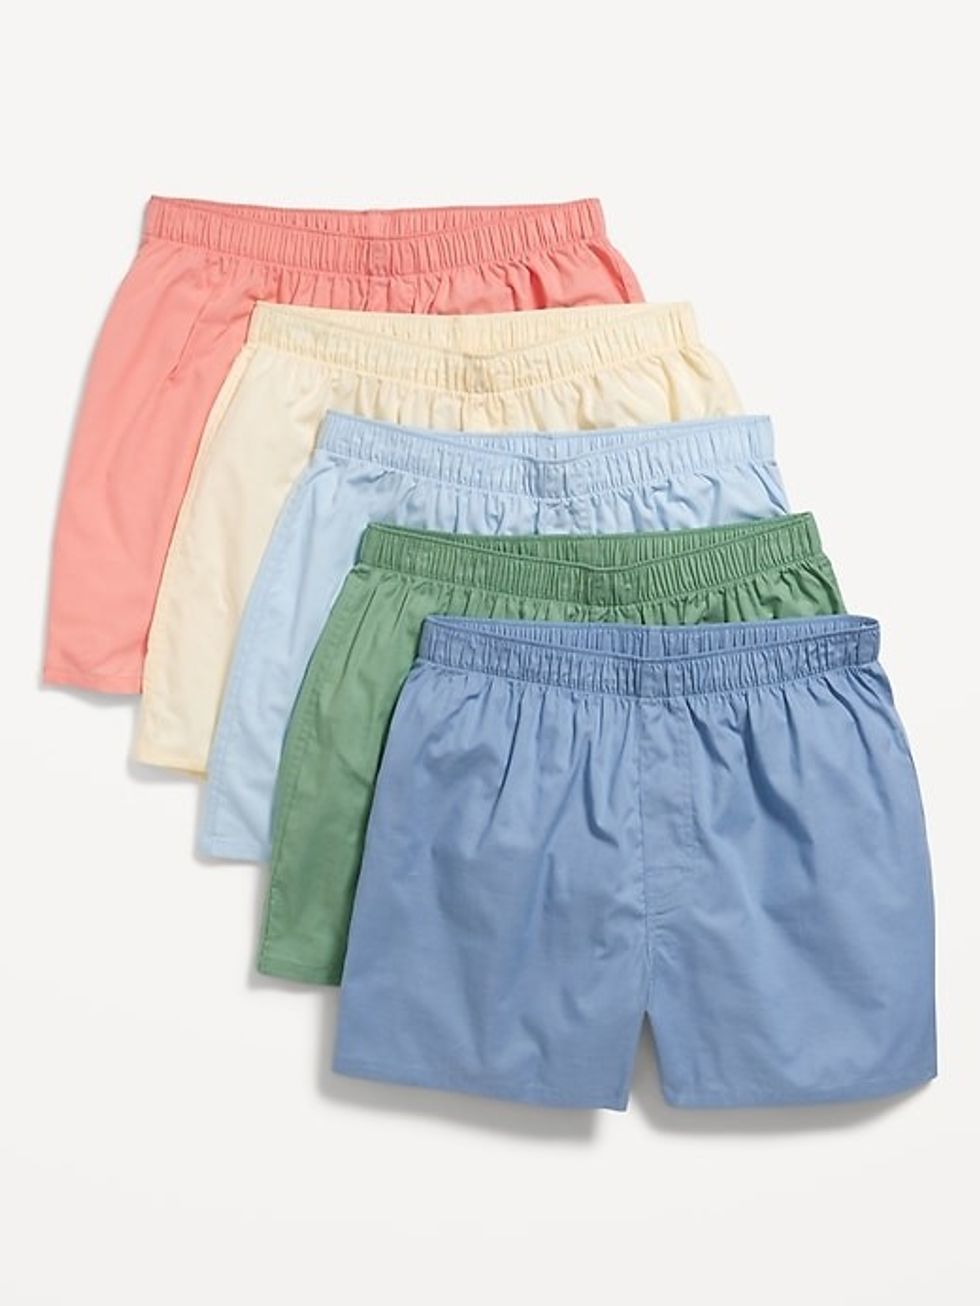 Old Navy Soft-Washed Boxer Shorts 5-Pack